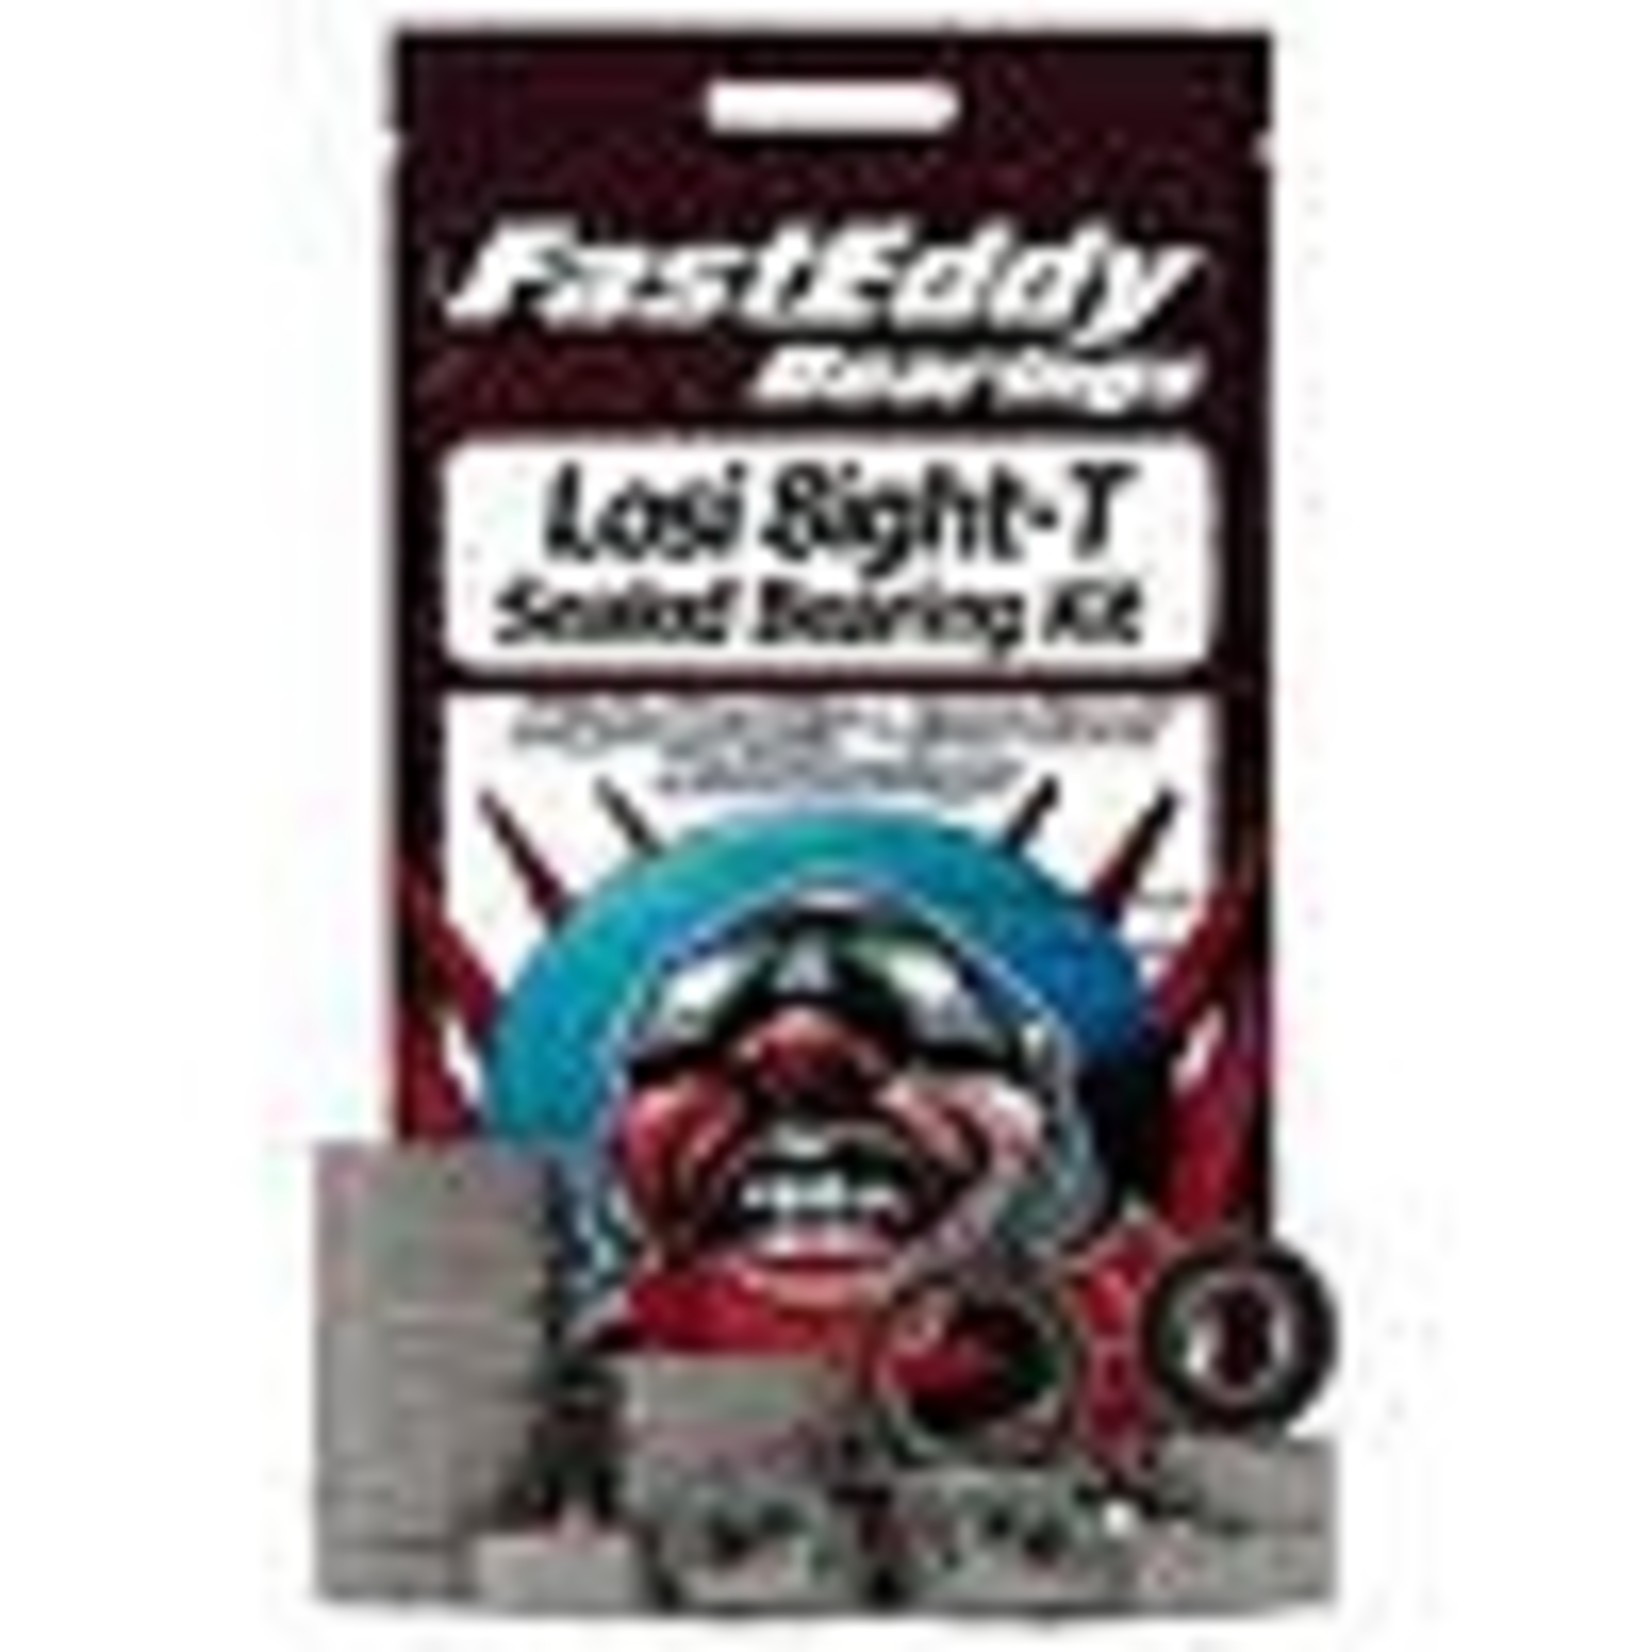 FastEddy TFE5906   Sealed Bearing Kit: TLR 8IGHT-X